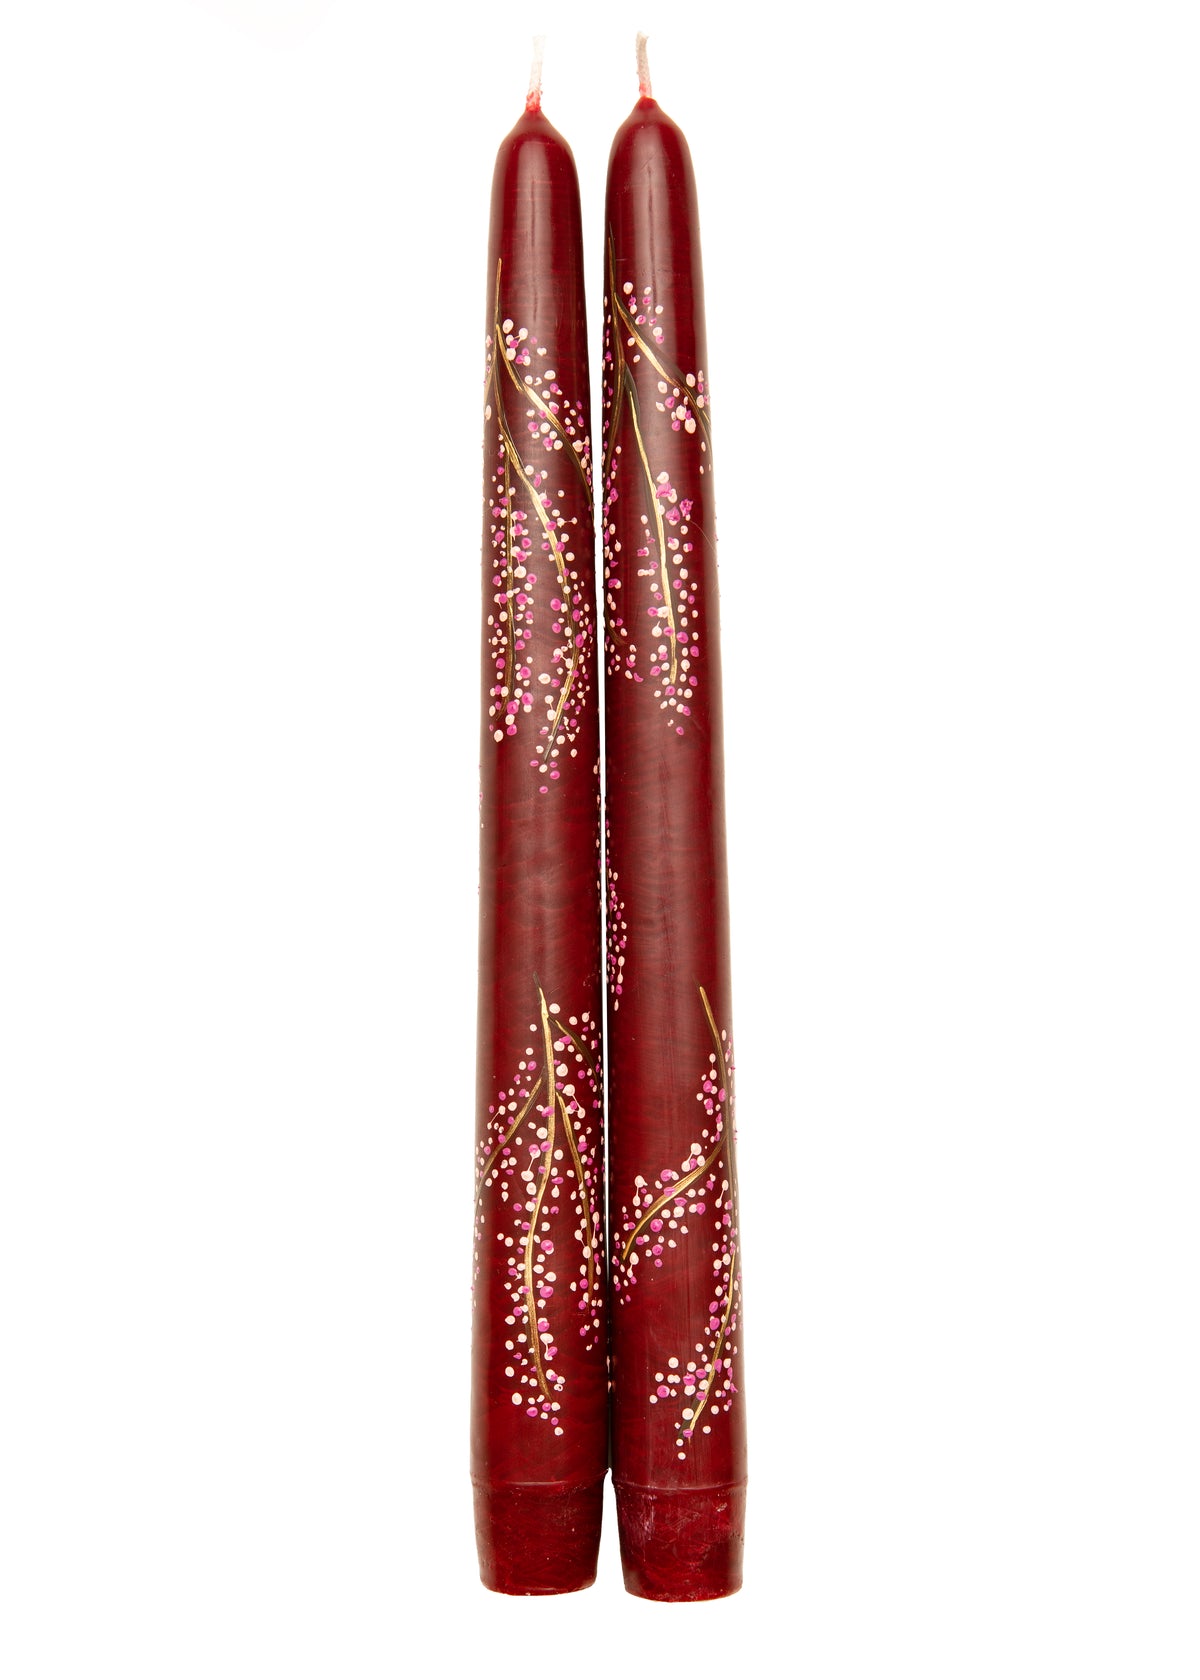 Burgundy Cherry Blossom Hand-Painted Taper Candles, Set of Two